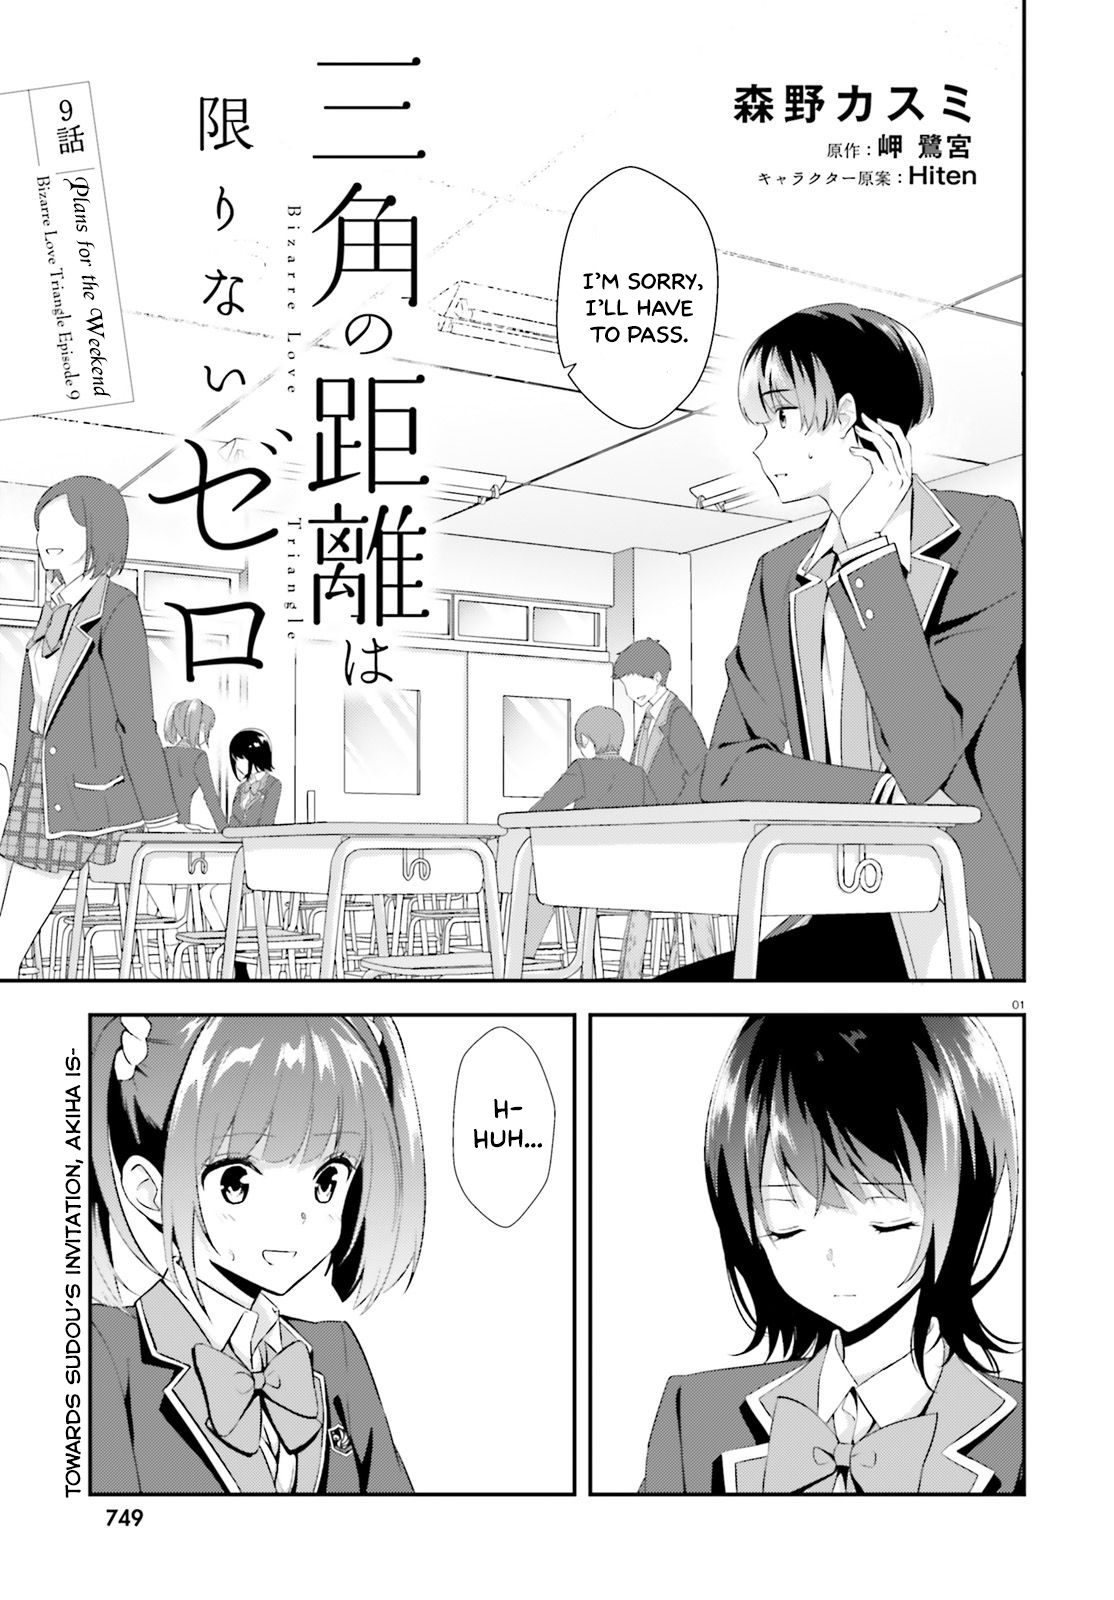 Bizarre Love Triangle Vol.2 Chapter 9: Plans For The Weekend - Picture 2